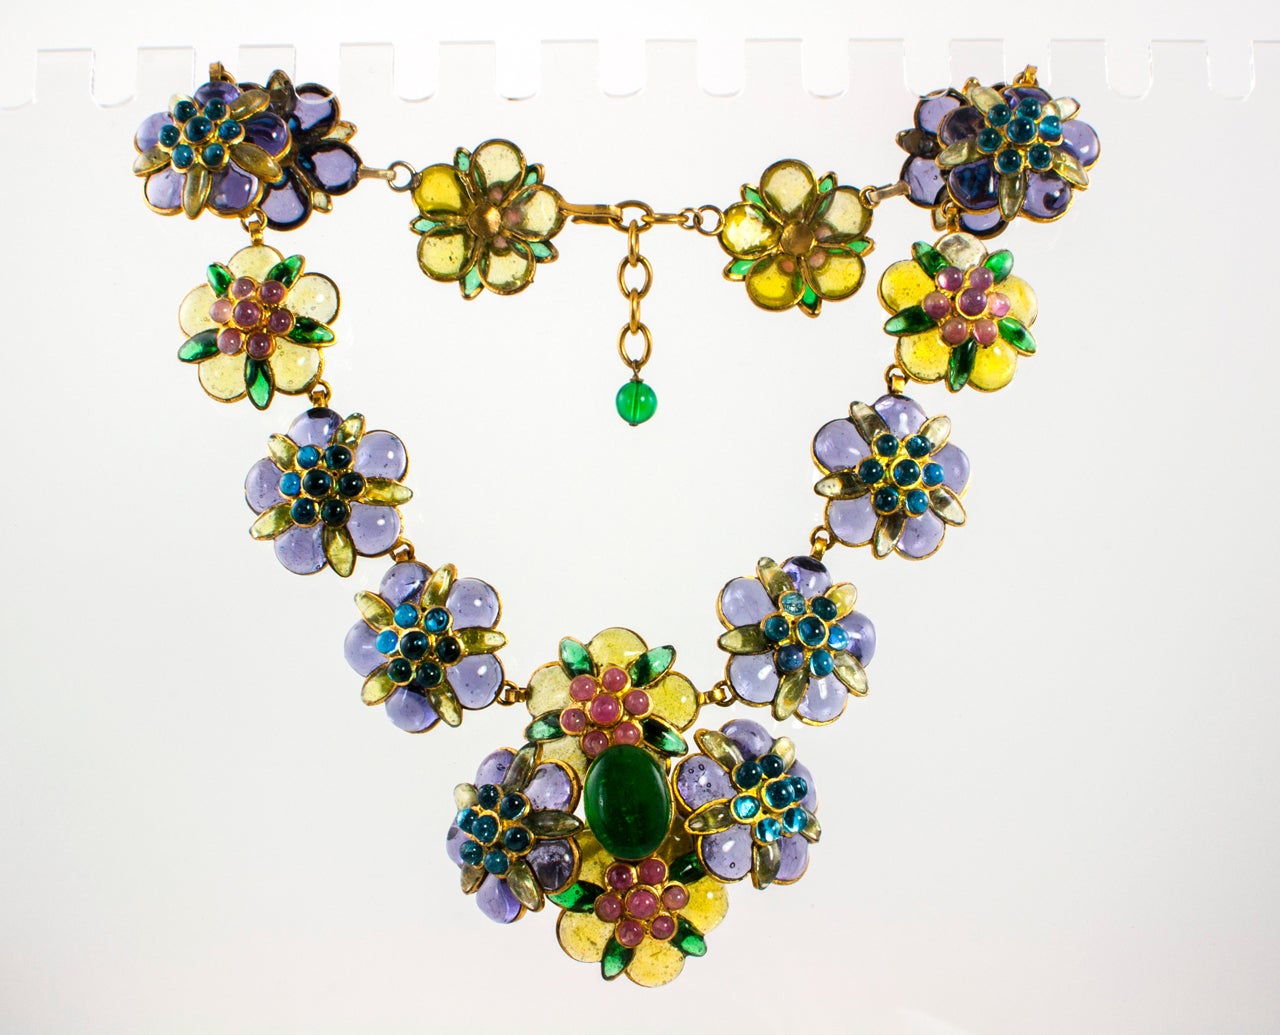 A elegant Gripoix necklace by Chanel featuring purple and yellow-green flowers accented with rose and blue centers and hints of green. The necklace is even more stunning in person than it appears in these images. Stamped on the back with the 